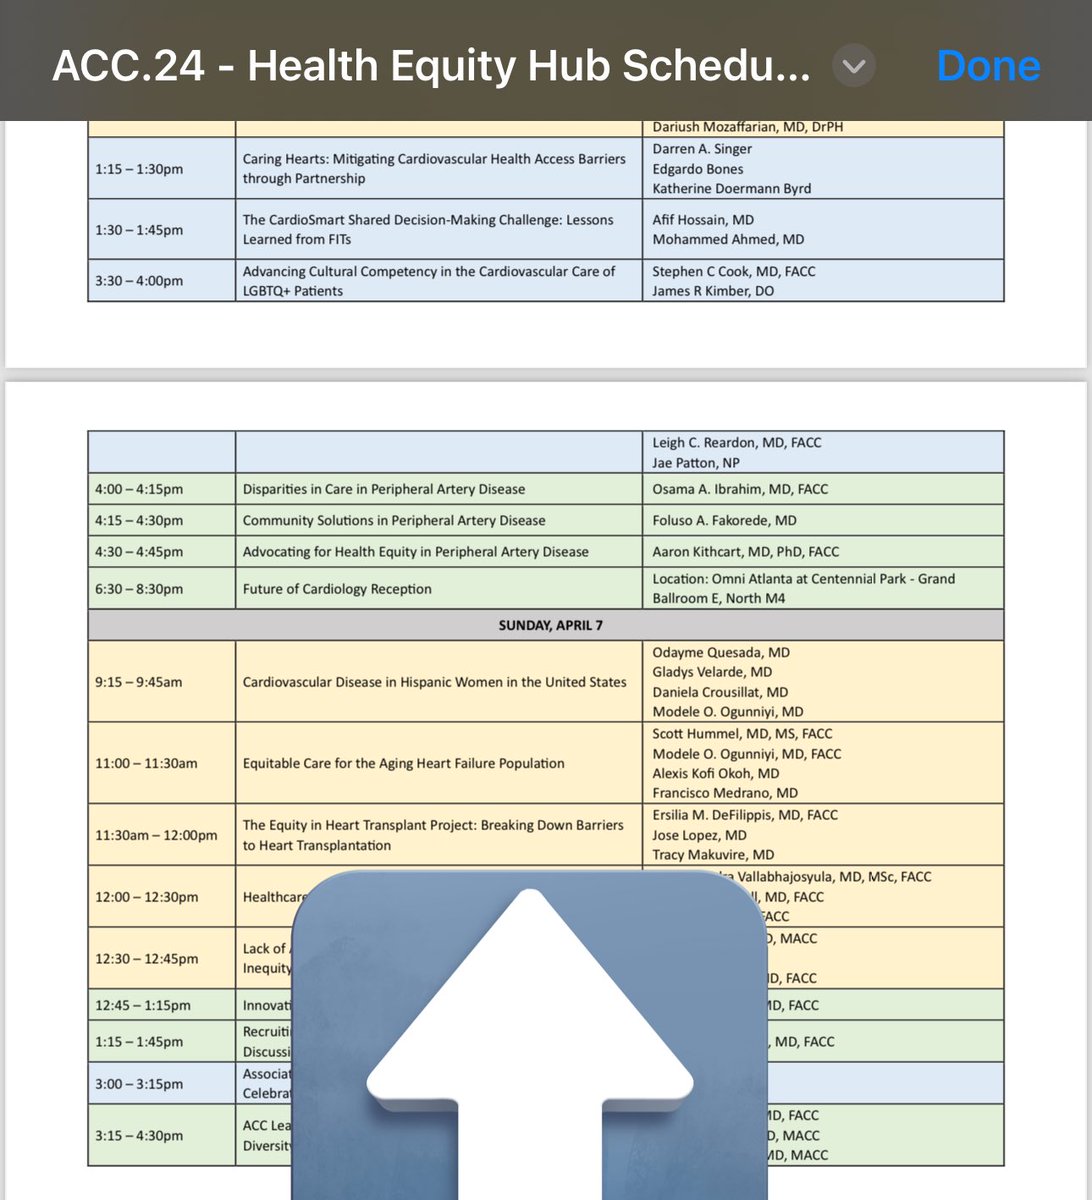 Swing by the #HealthEquity Hub at #ACC24 to see me and @tracymakMD talking about our work at @TEHTP_INC Shoutout to @DrNasrien and @HFnursemaghee for this opportunity! @MelvinEchols9 @JavedButler1 @Jcontreras75 @AndrewJSauer @EiranGorodeski @AHajduczok @JJheart_doc @ACCinTouch